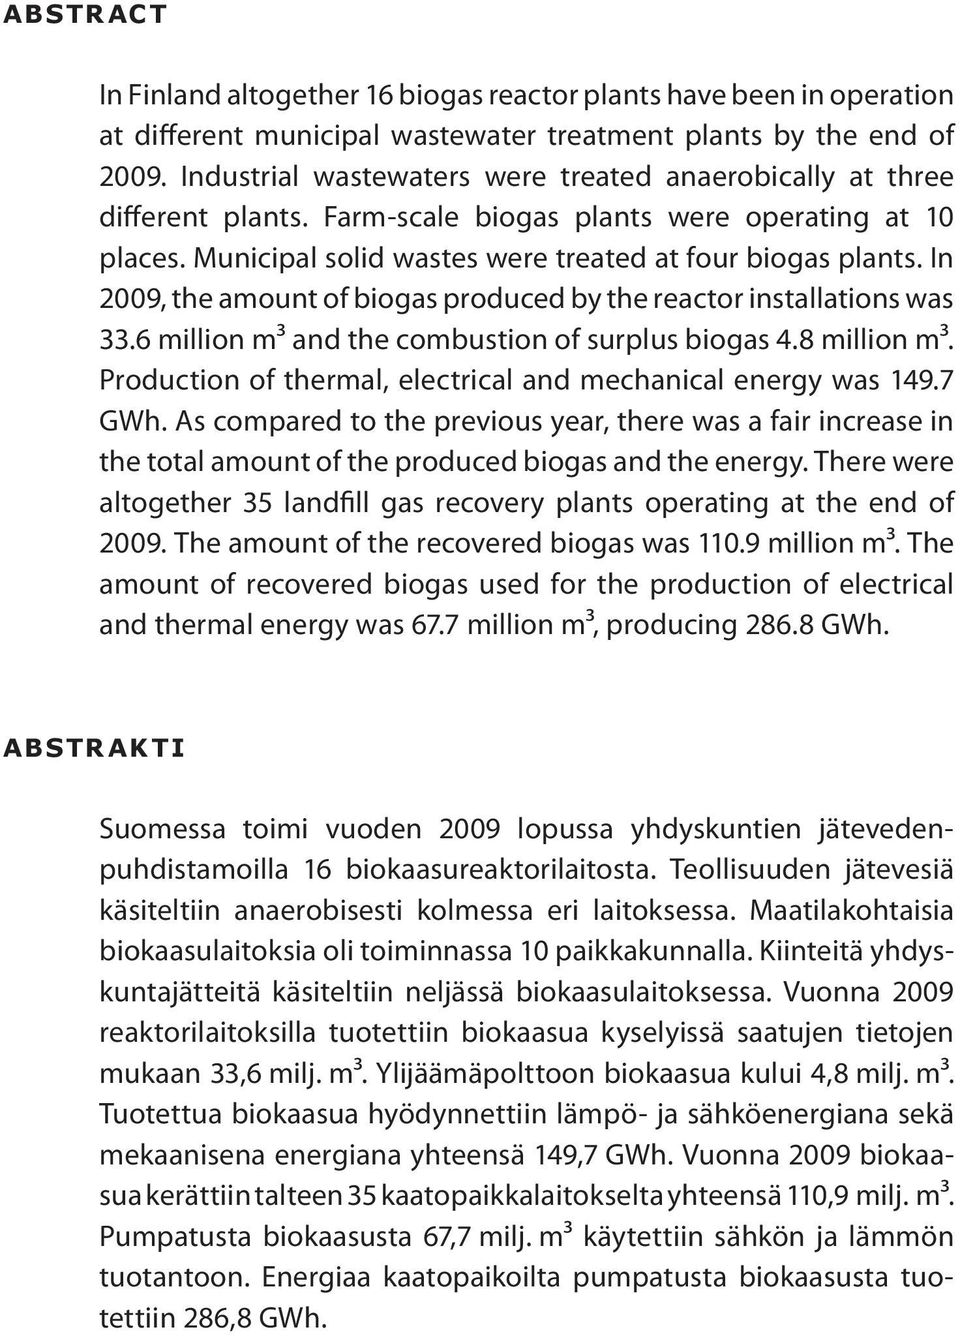 In 2009, the amount of biogas produced by the reactor installations was 33.6 million m3 and the combustion of surplus biogas 4.8 million m3.